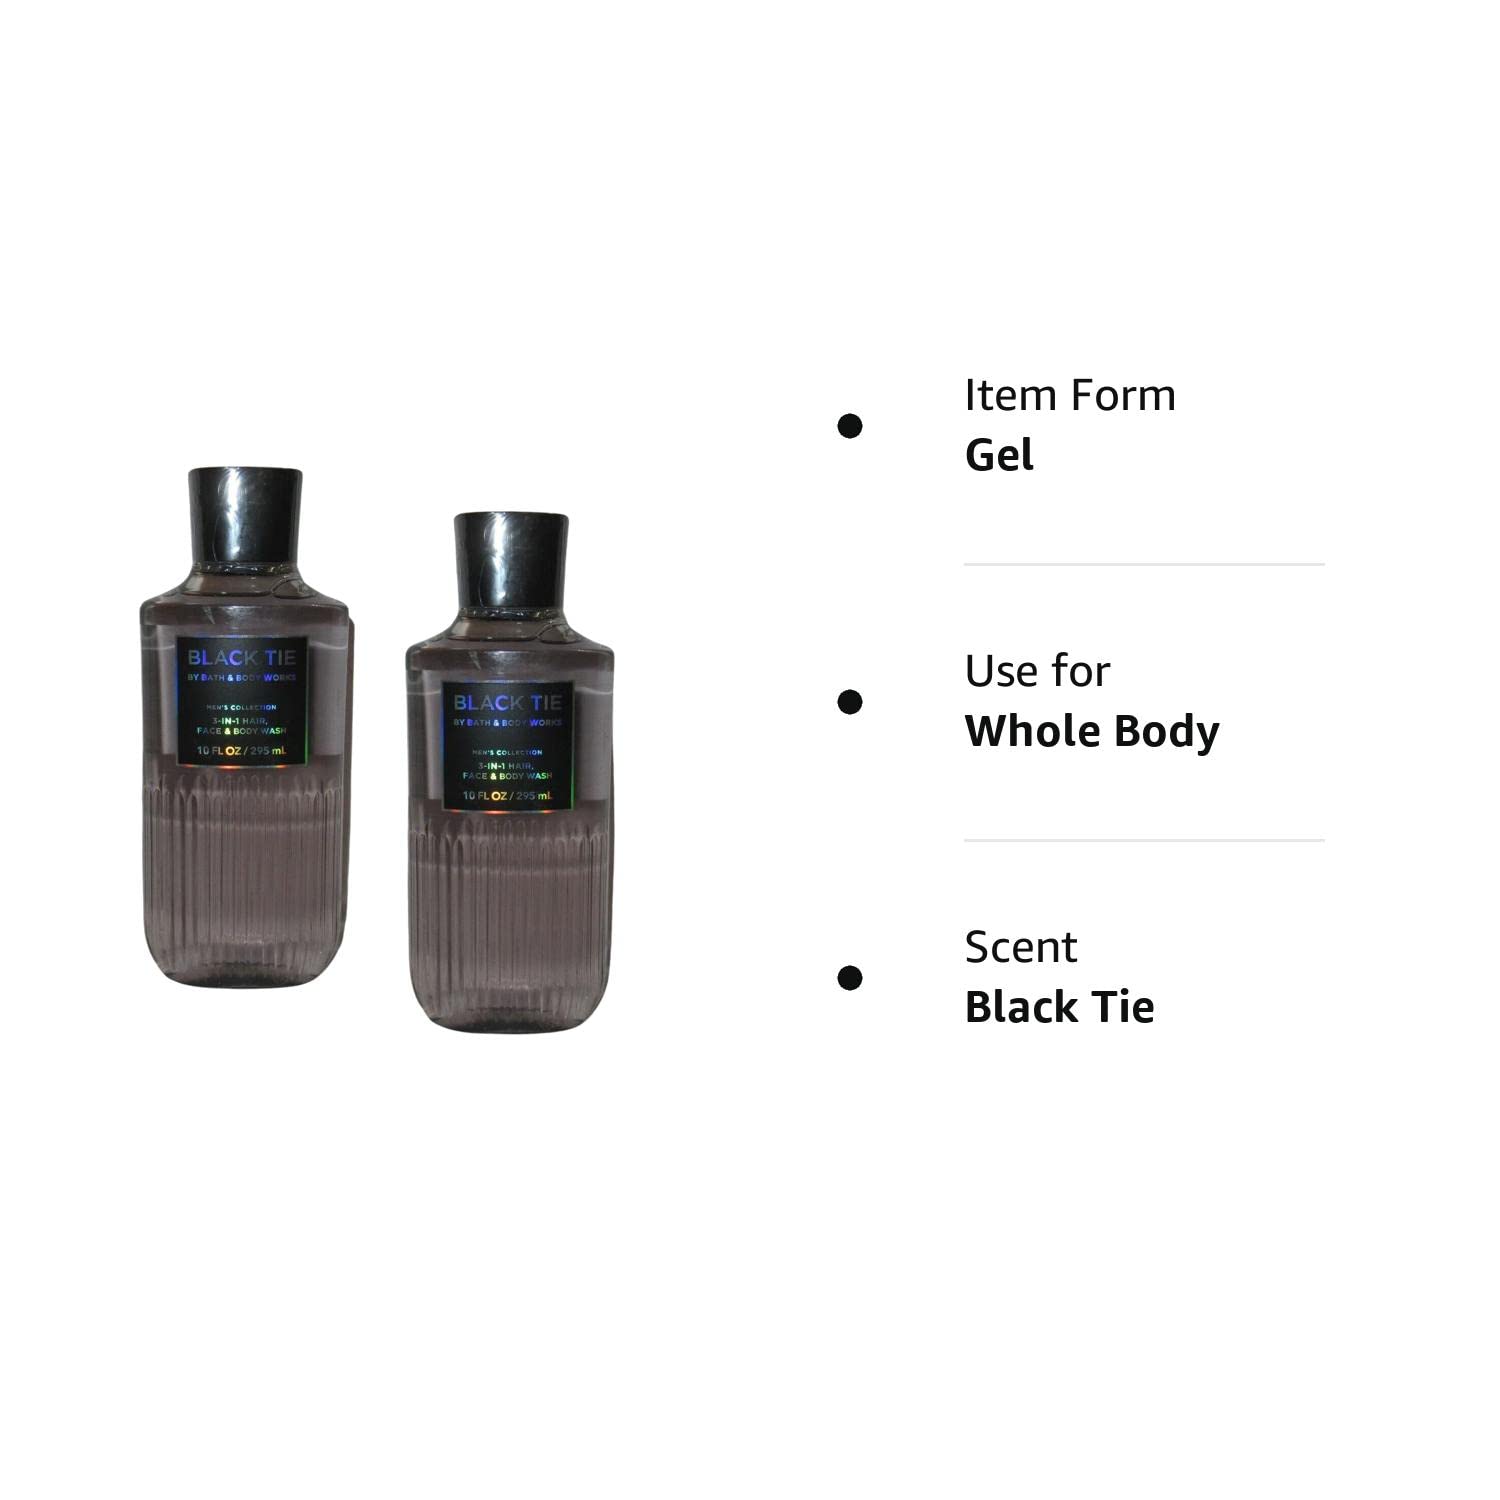 Bath and Body Works For Men 3-in-1 Hair, Face & Body Wash - Value Pack lot of 2 - Full Size (Black Tie)